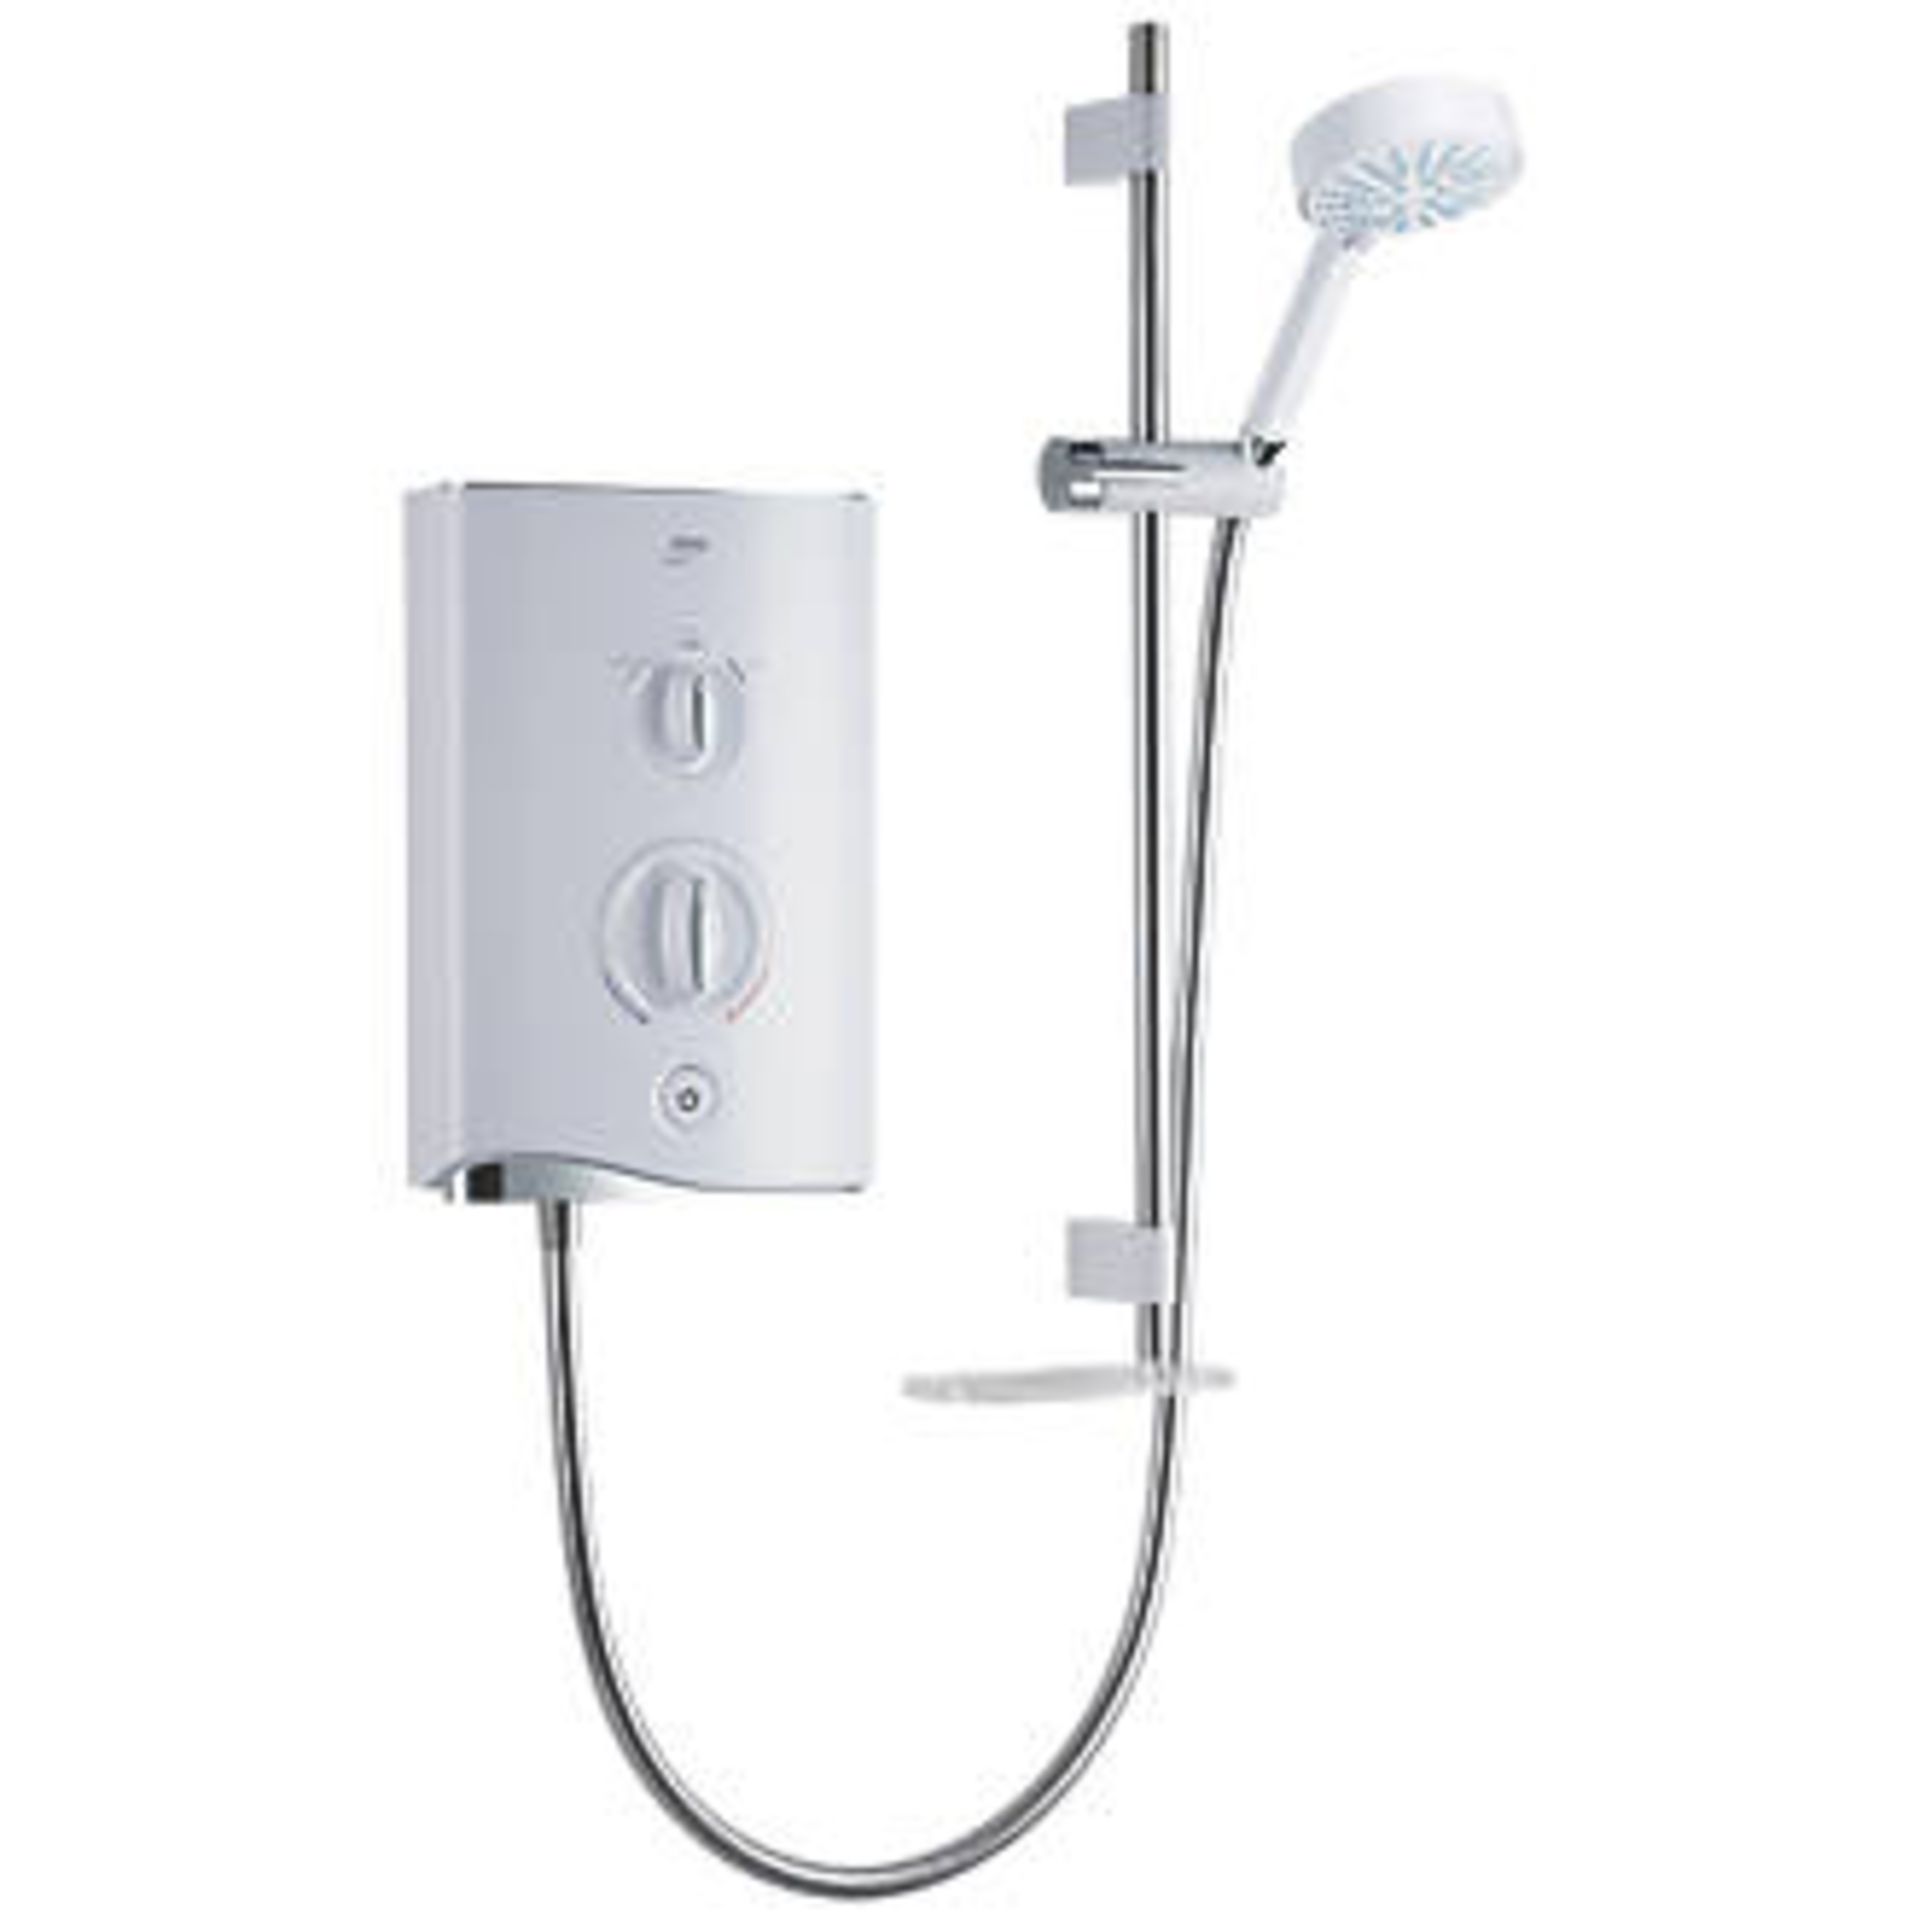 MIRA SPORT MULTI-FIT WHITE 9KW MANUAL ELECTRIC SHOWER (PCK)